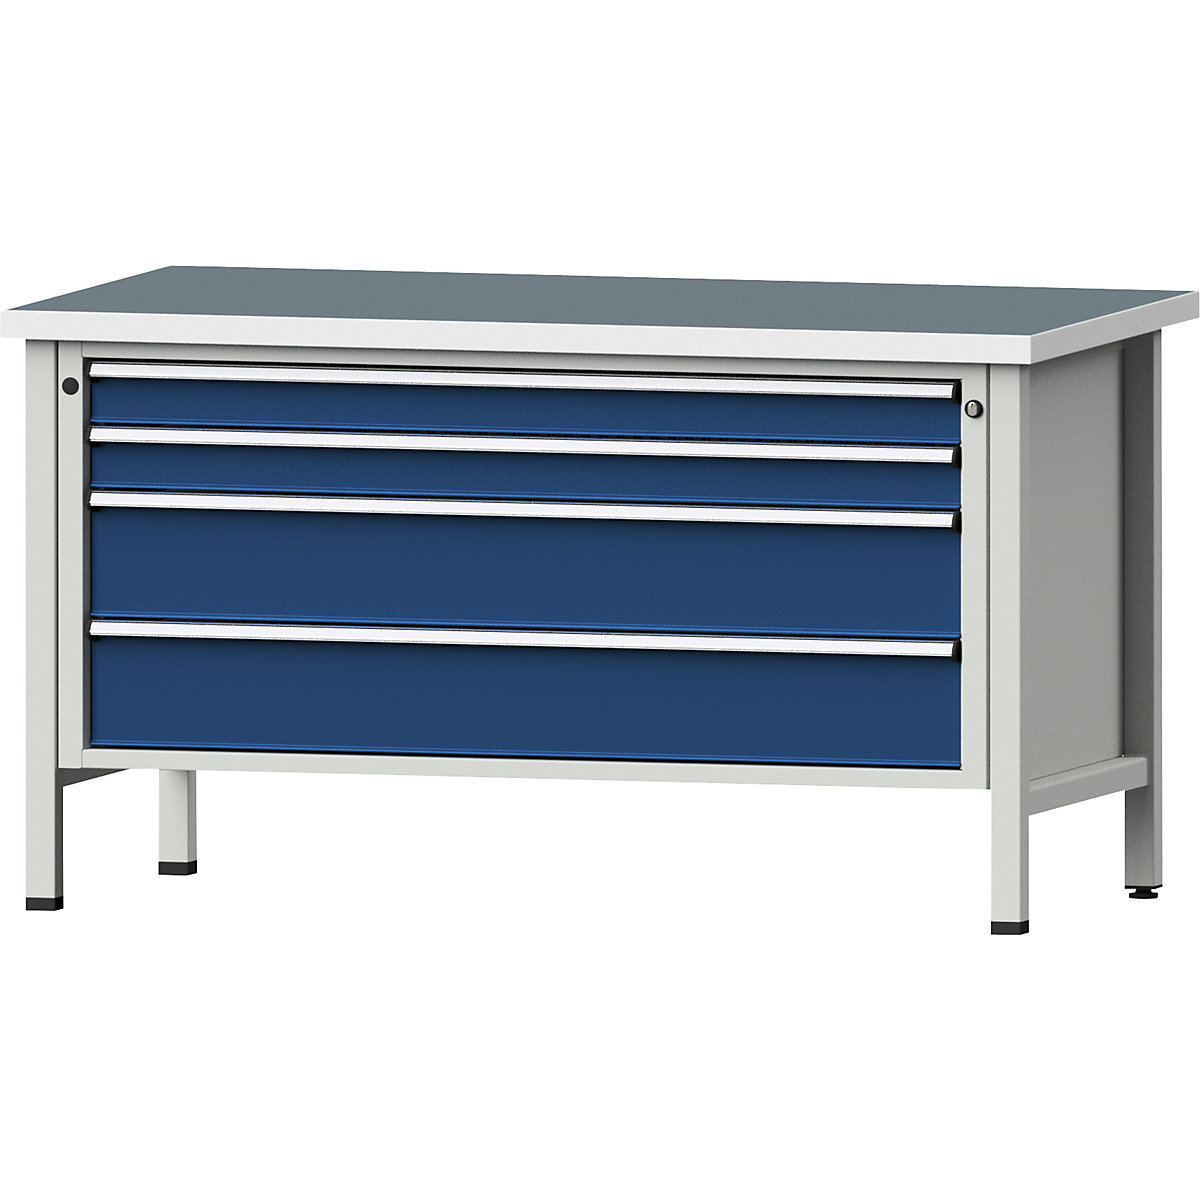 Workbench with XL/XXL drawers, frame construction – ANKE, width 1500 mm, 4 drawers, universal worktop, front in gentian blue-10